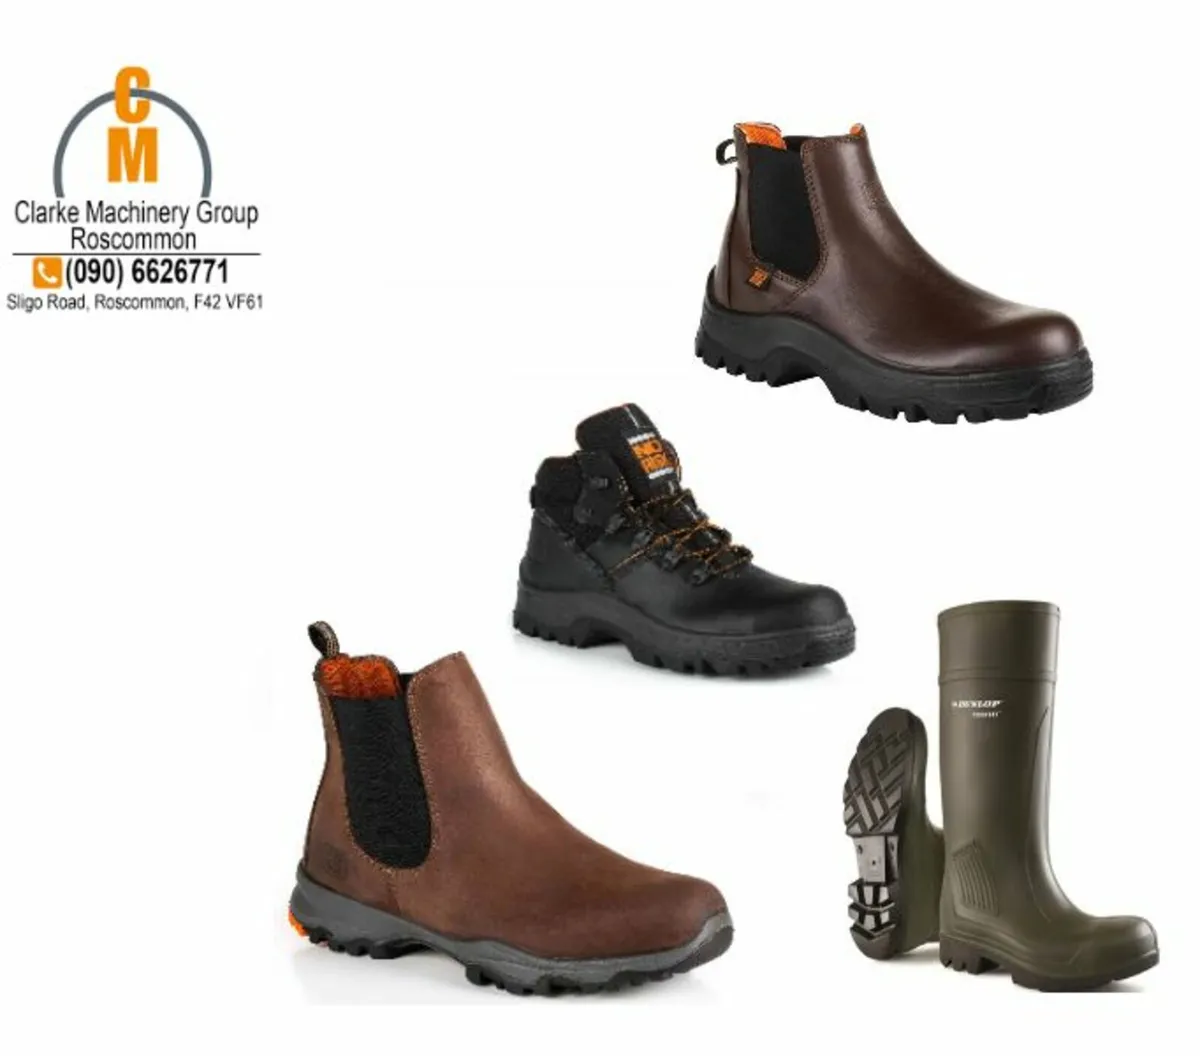 Wellies and Boots in Stock!!! - Image 1